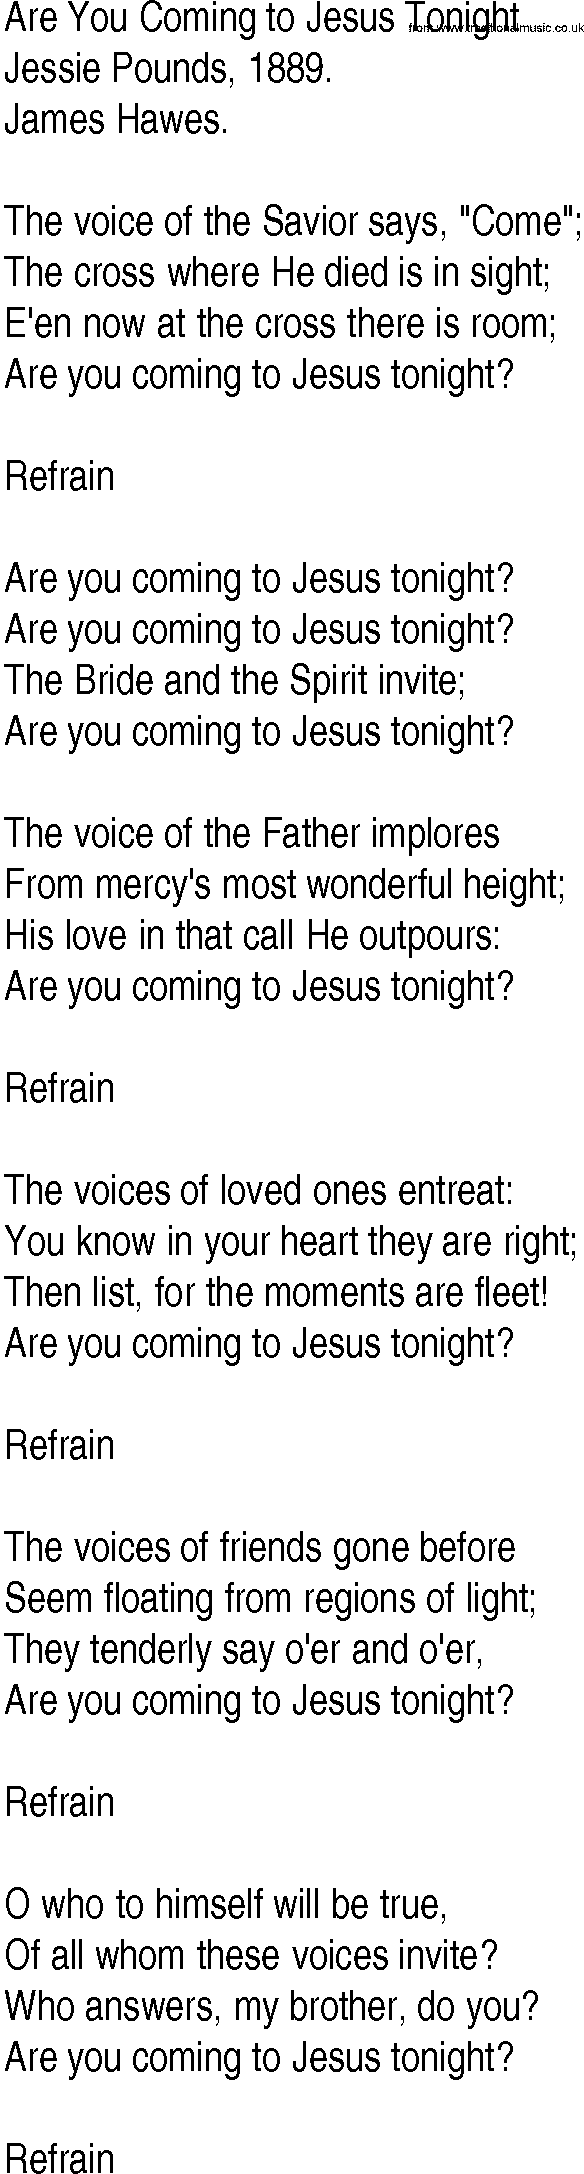 Hymn and Gospel Song: Are You Coming to Jesus Tonight by Jessie Pounds lyrics